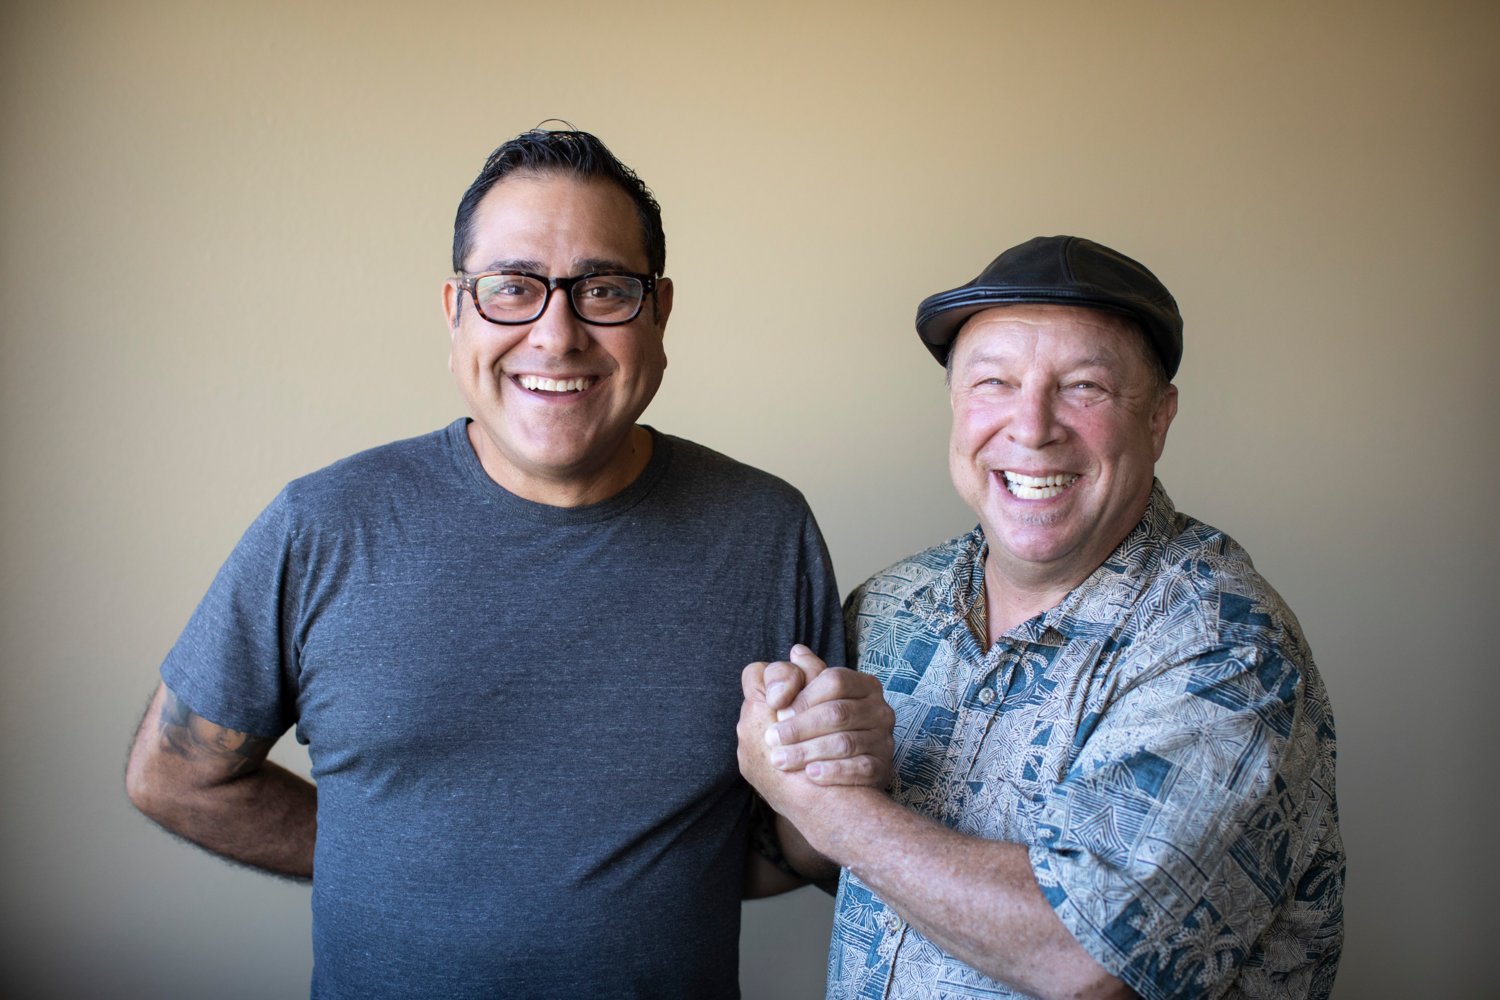 Tommy Russo, founder of MauiTimes, and J. Sam Weiss, the new publisher/executive editor, celebrate their new partnership and the re-launch of the publication.